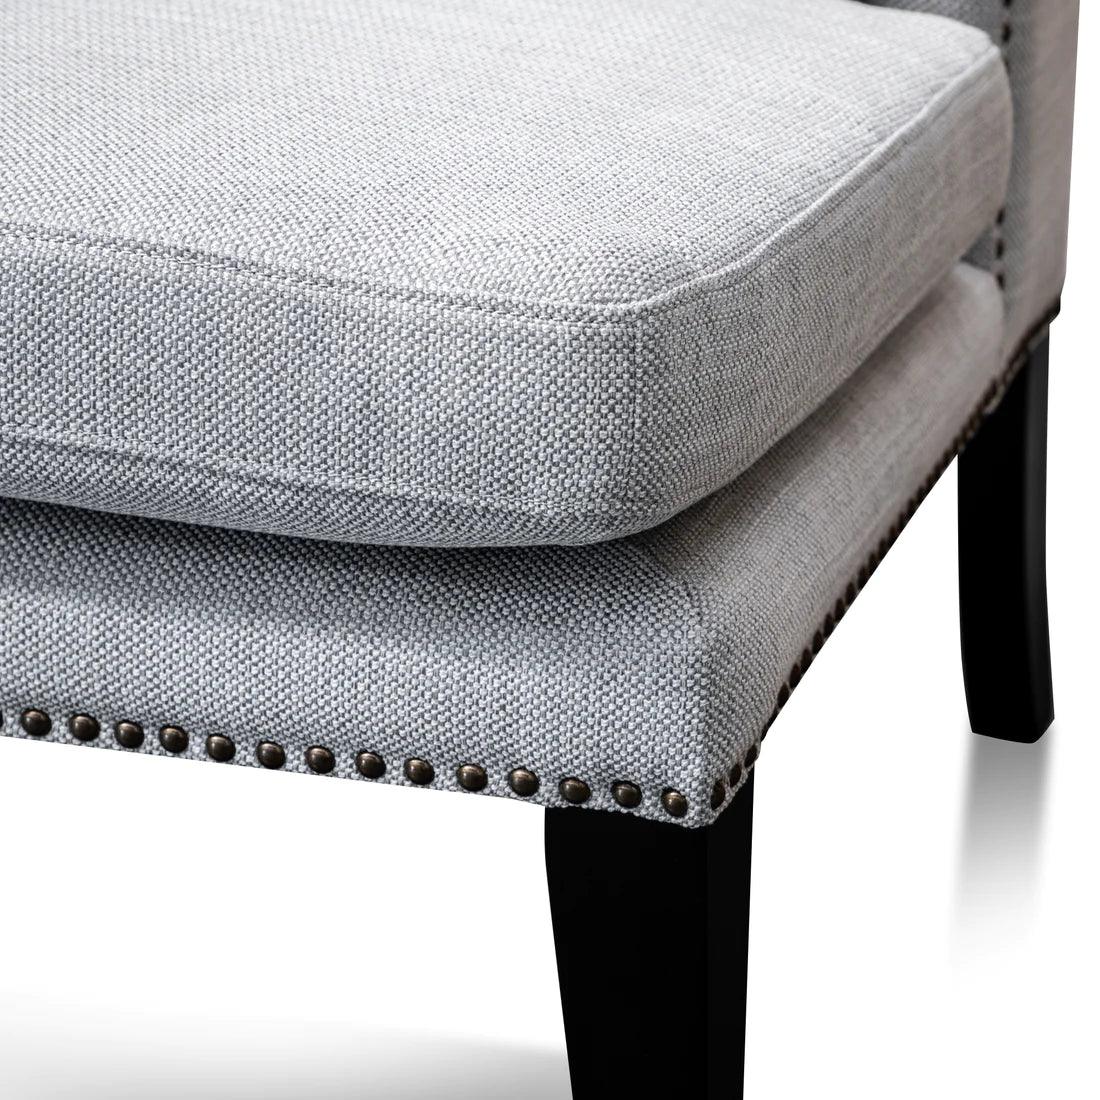 California Lounge Chair in Light Texture Grey - Furniture Castle